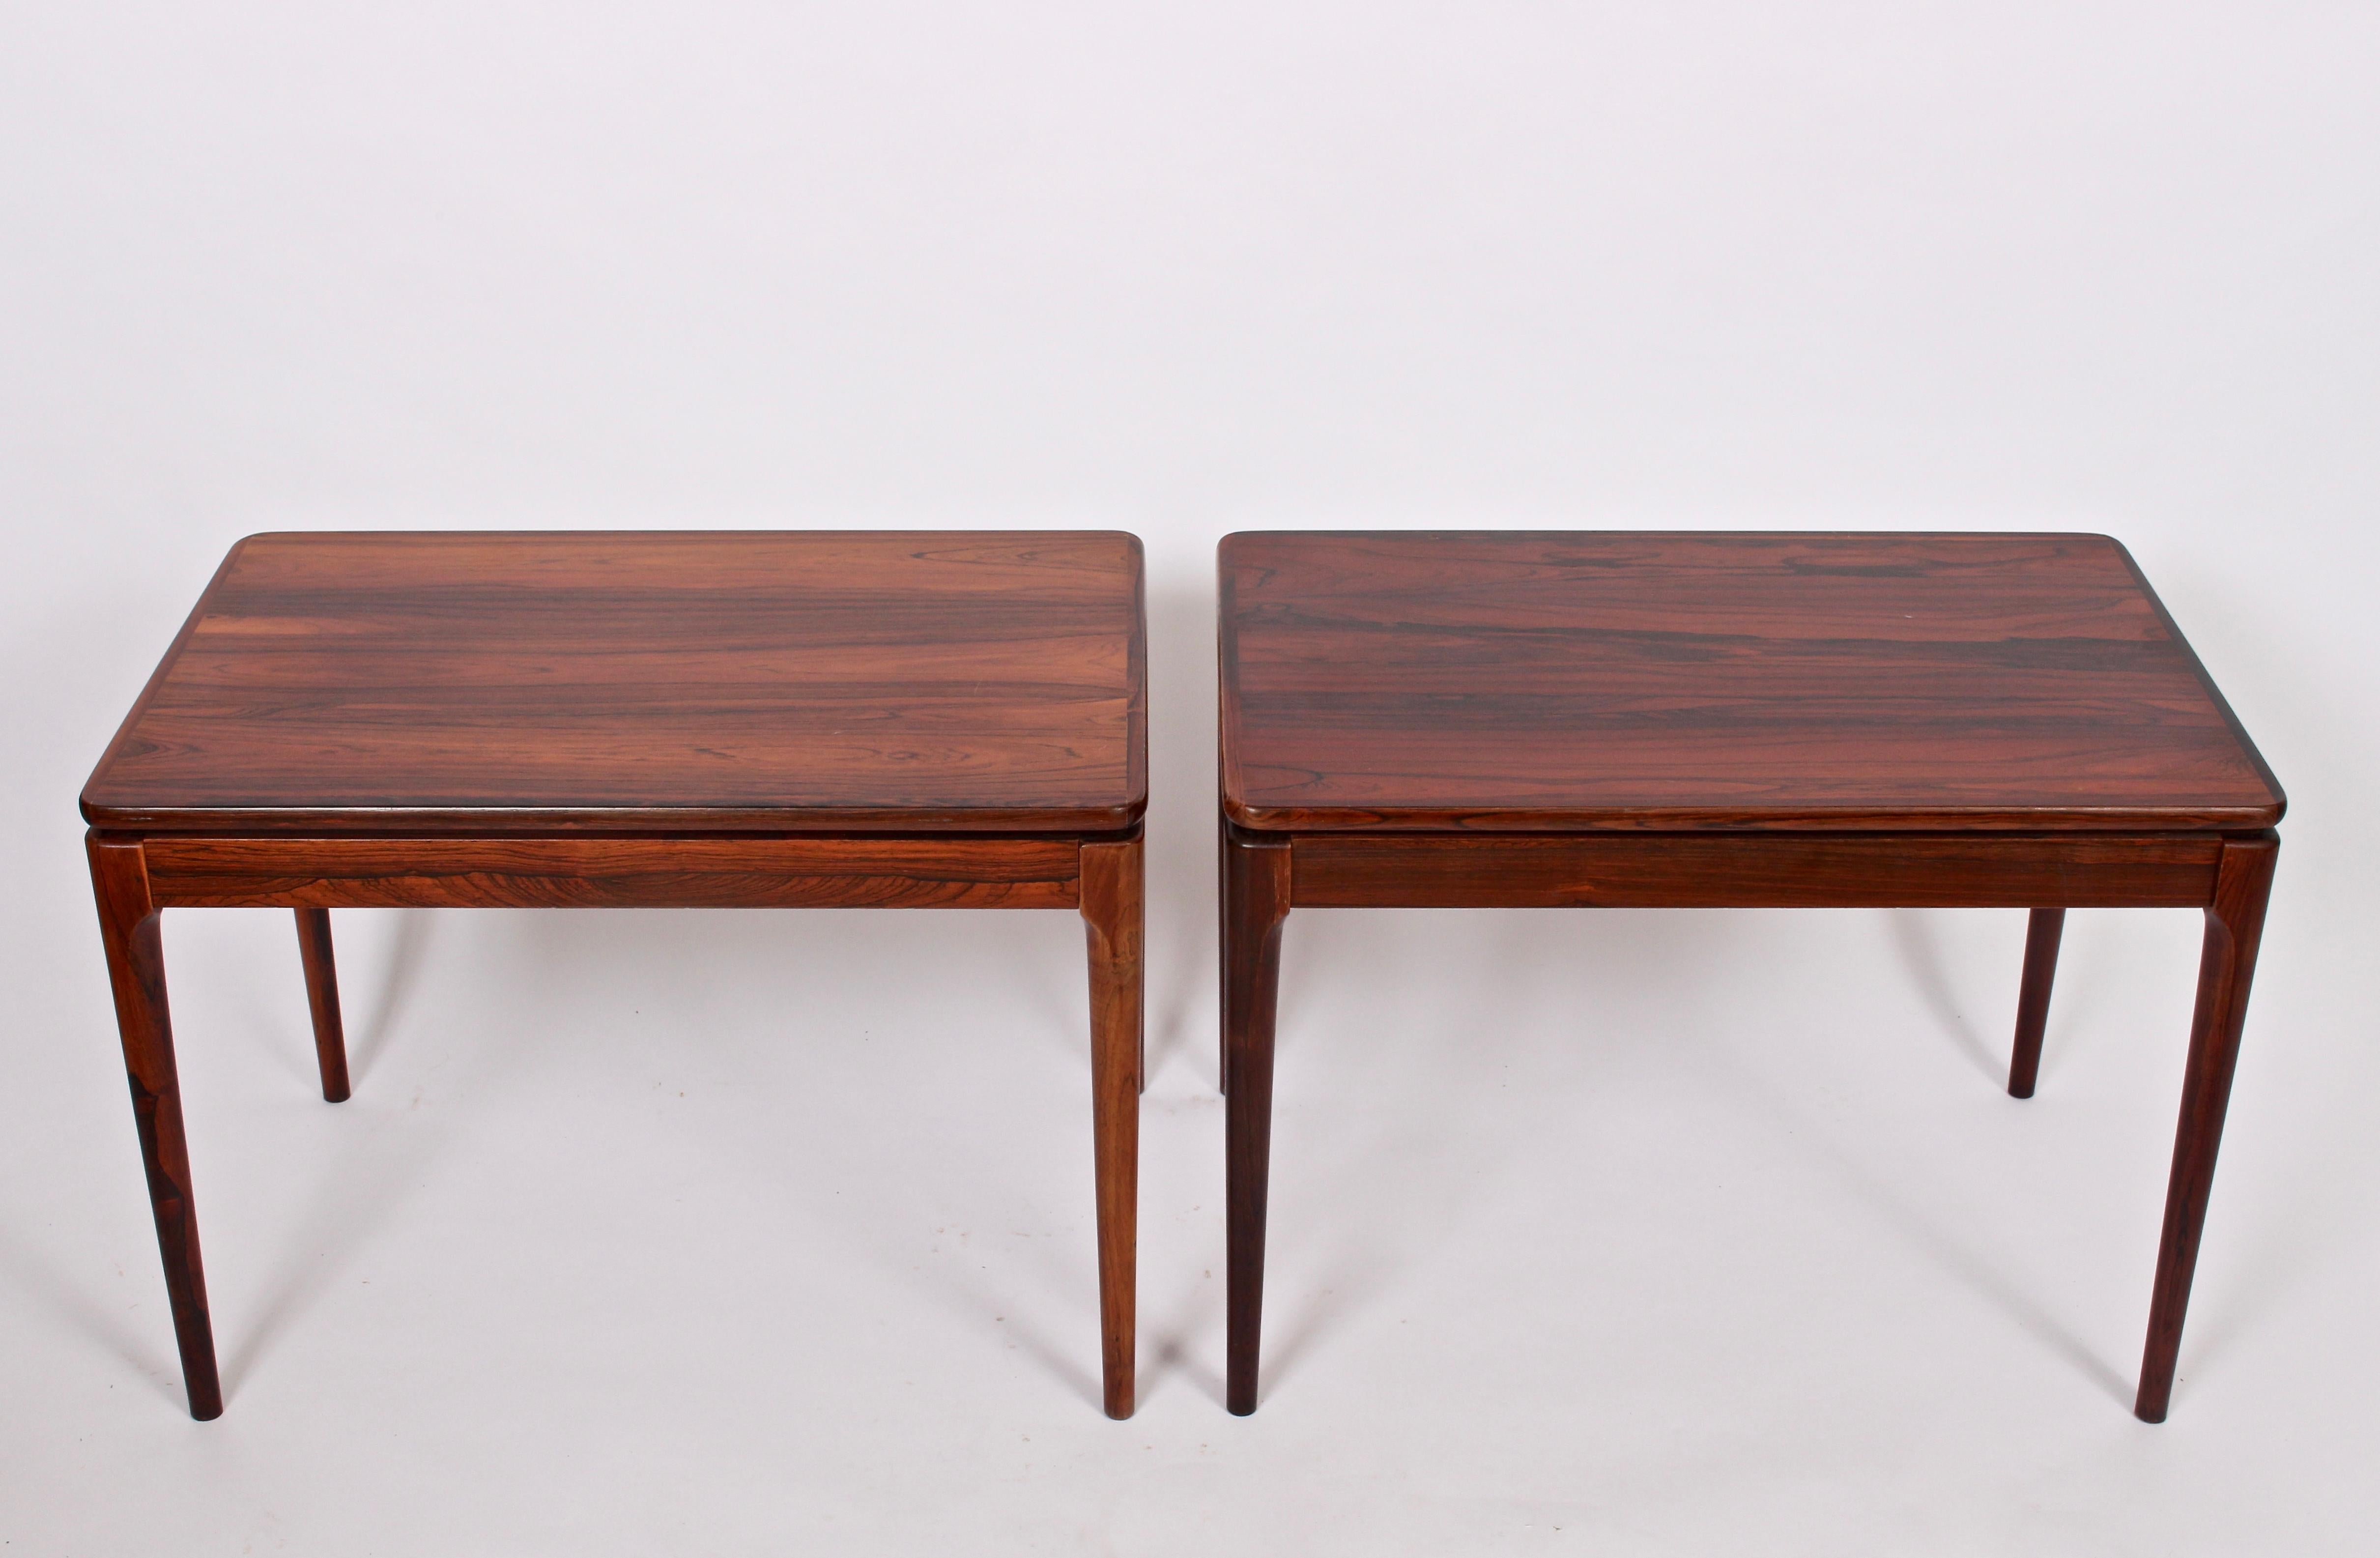 Pair of Norwegian Modern Ganddal Mobelfabrikk rosewood side tables, bedside tables. Featuring a rectangular form in solid rosewood with slotted vertice detail between turned solid rosewood legs and surface. Common rosewood color variation seen in